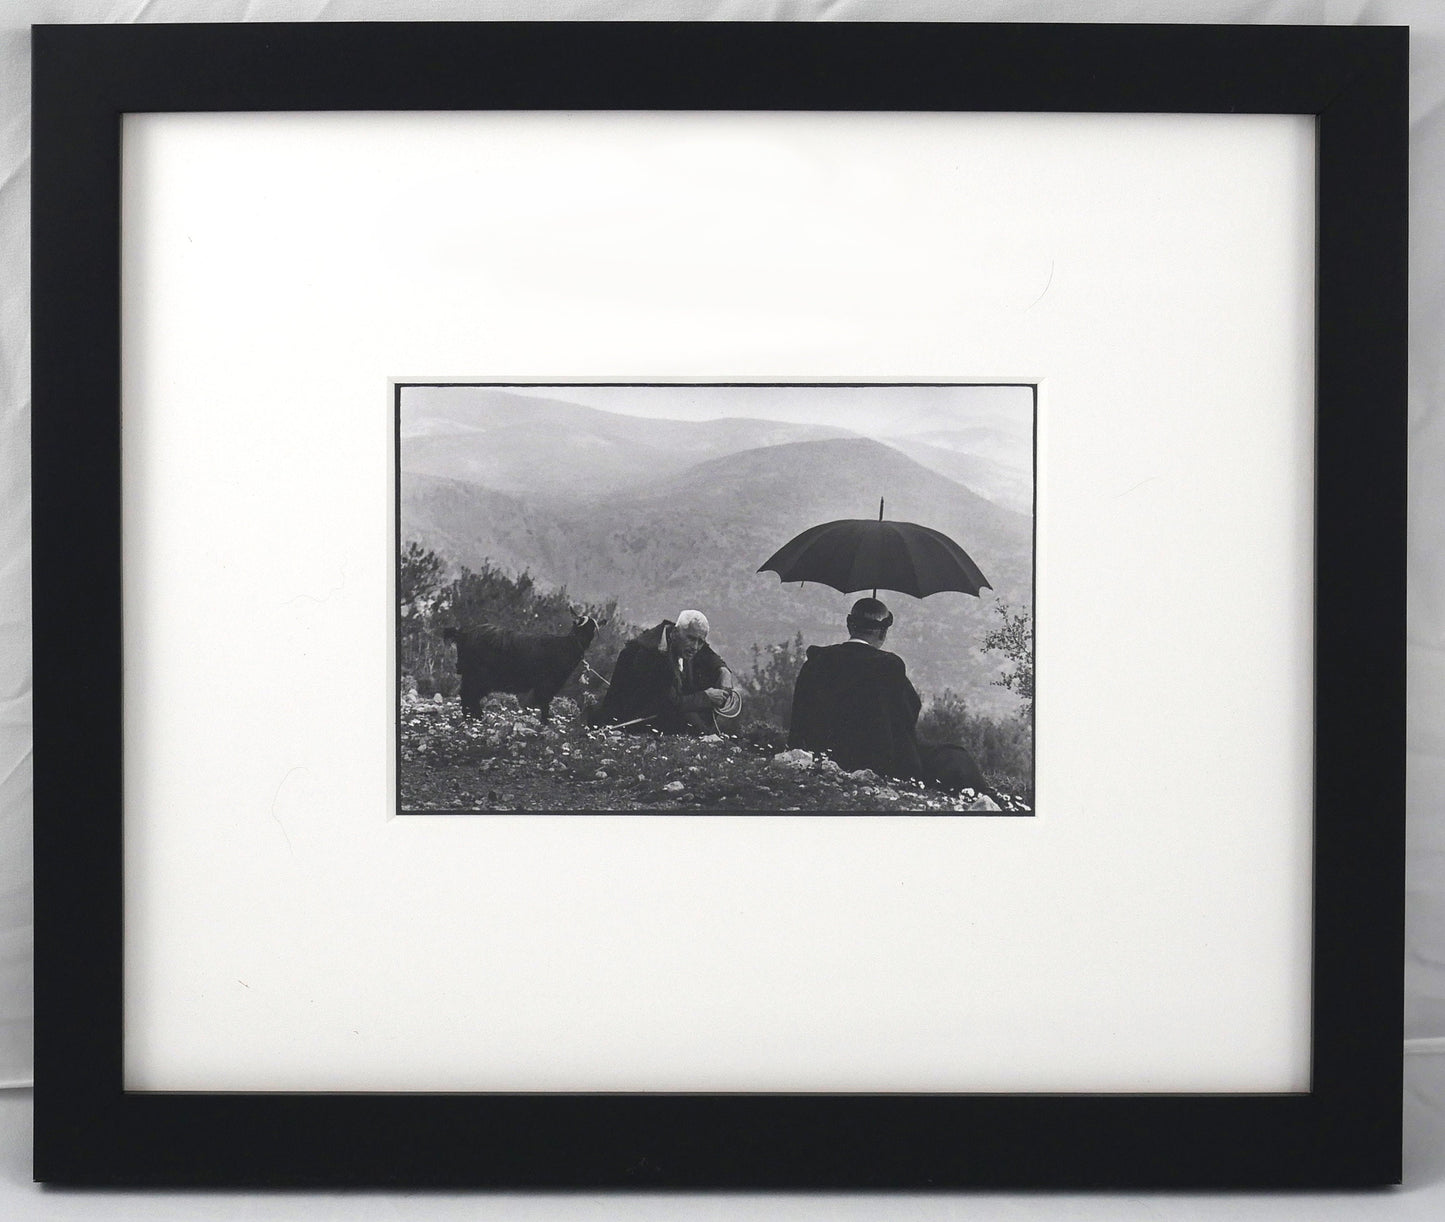 Constantine Manos Signed Shepherds with a Goat Crete Greece 1964 Limited Edition Magnum Photograph Print FRAMED